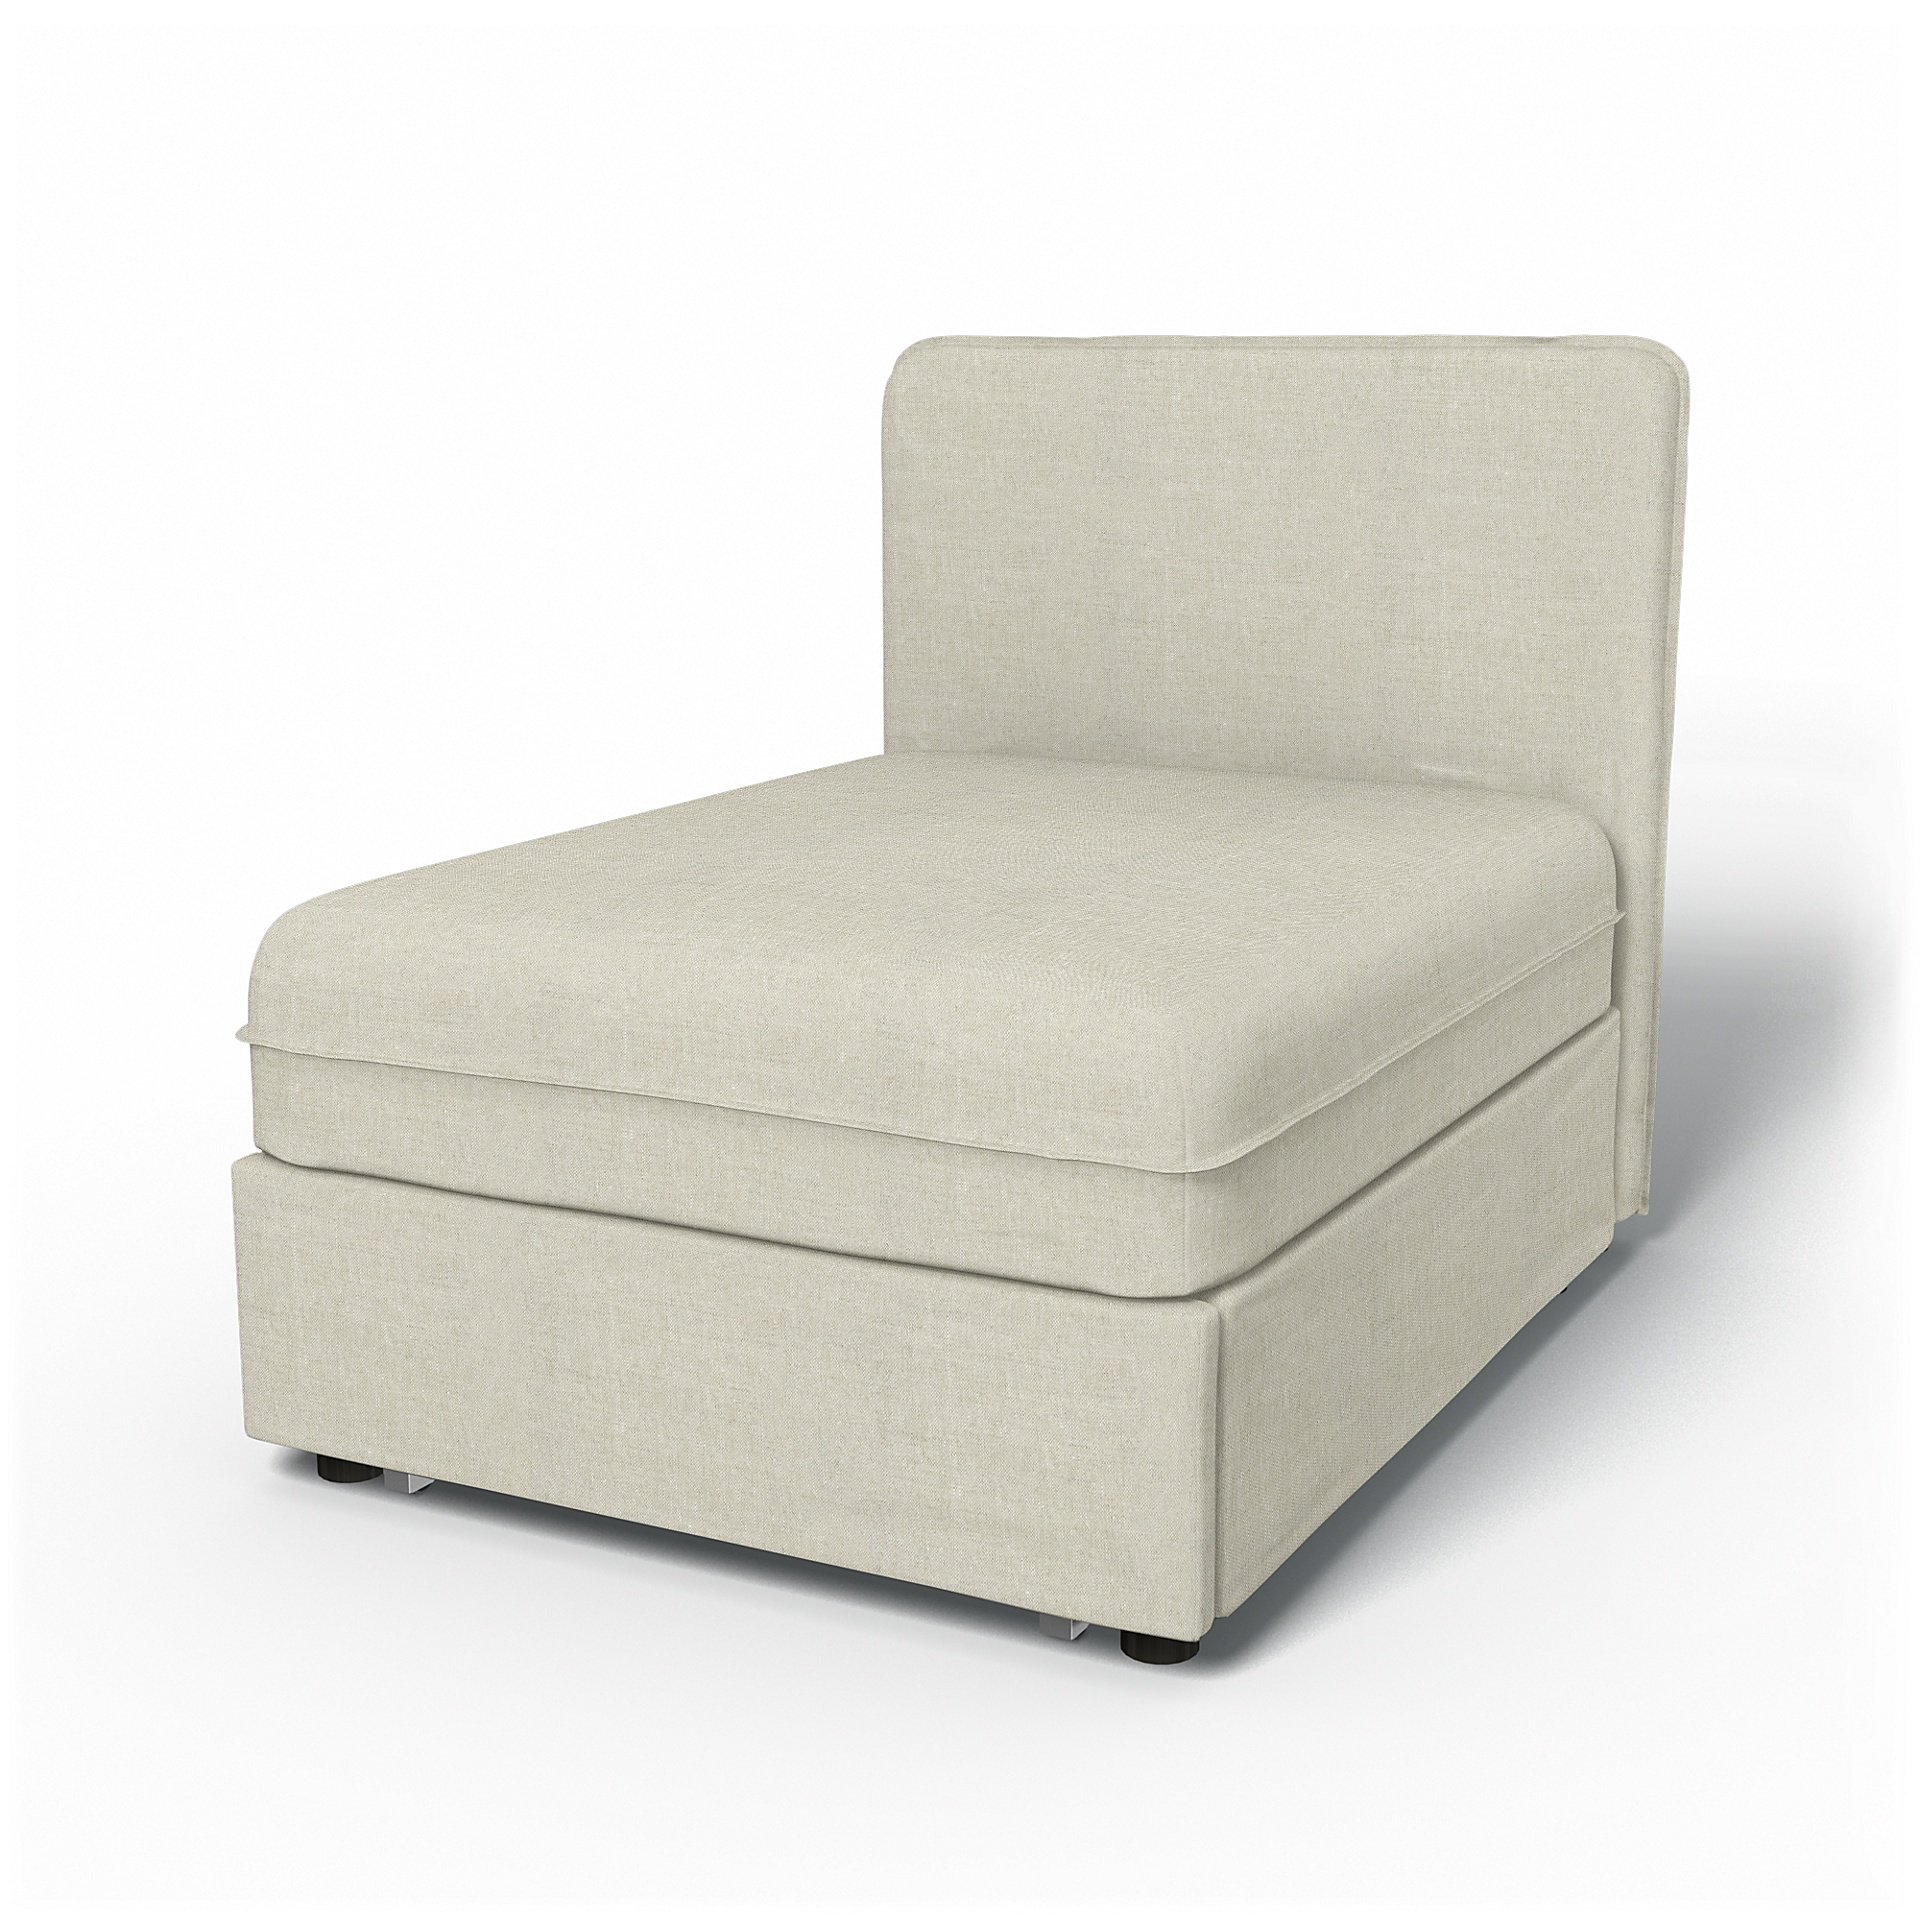 IKEA - Vallentuna Seat Module with Low Back Sofa Bed Cover 80x100 cm 32x39in, Natural, Linen - Bemz